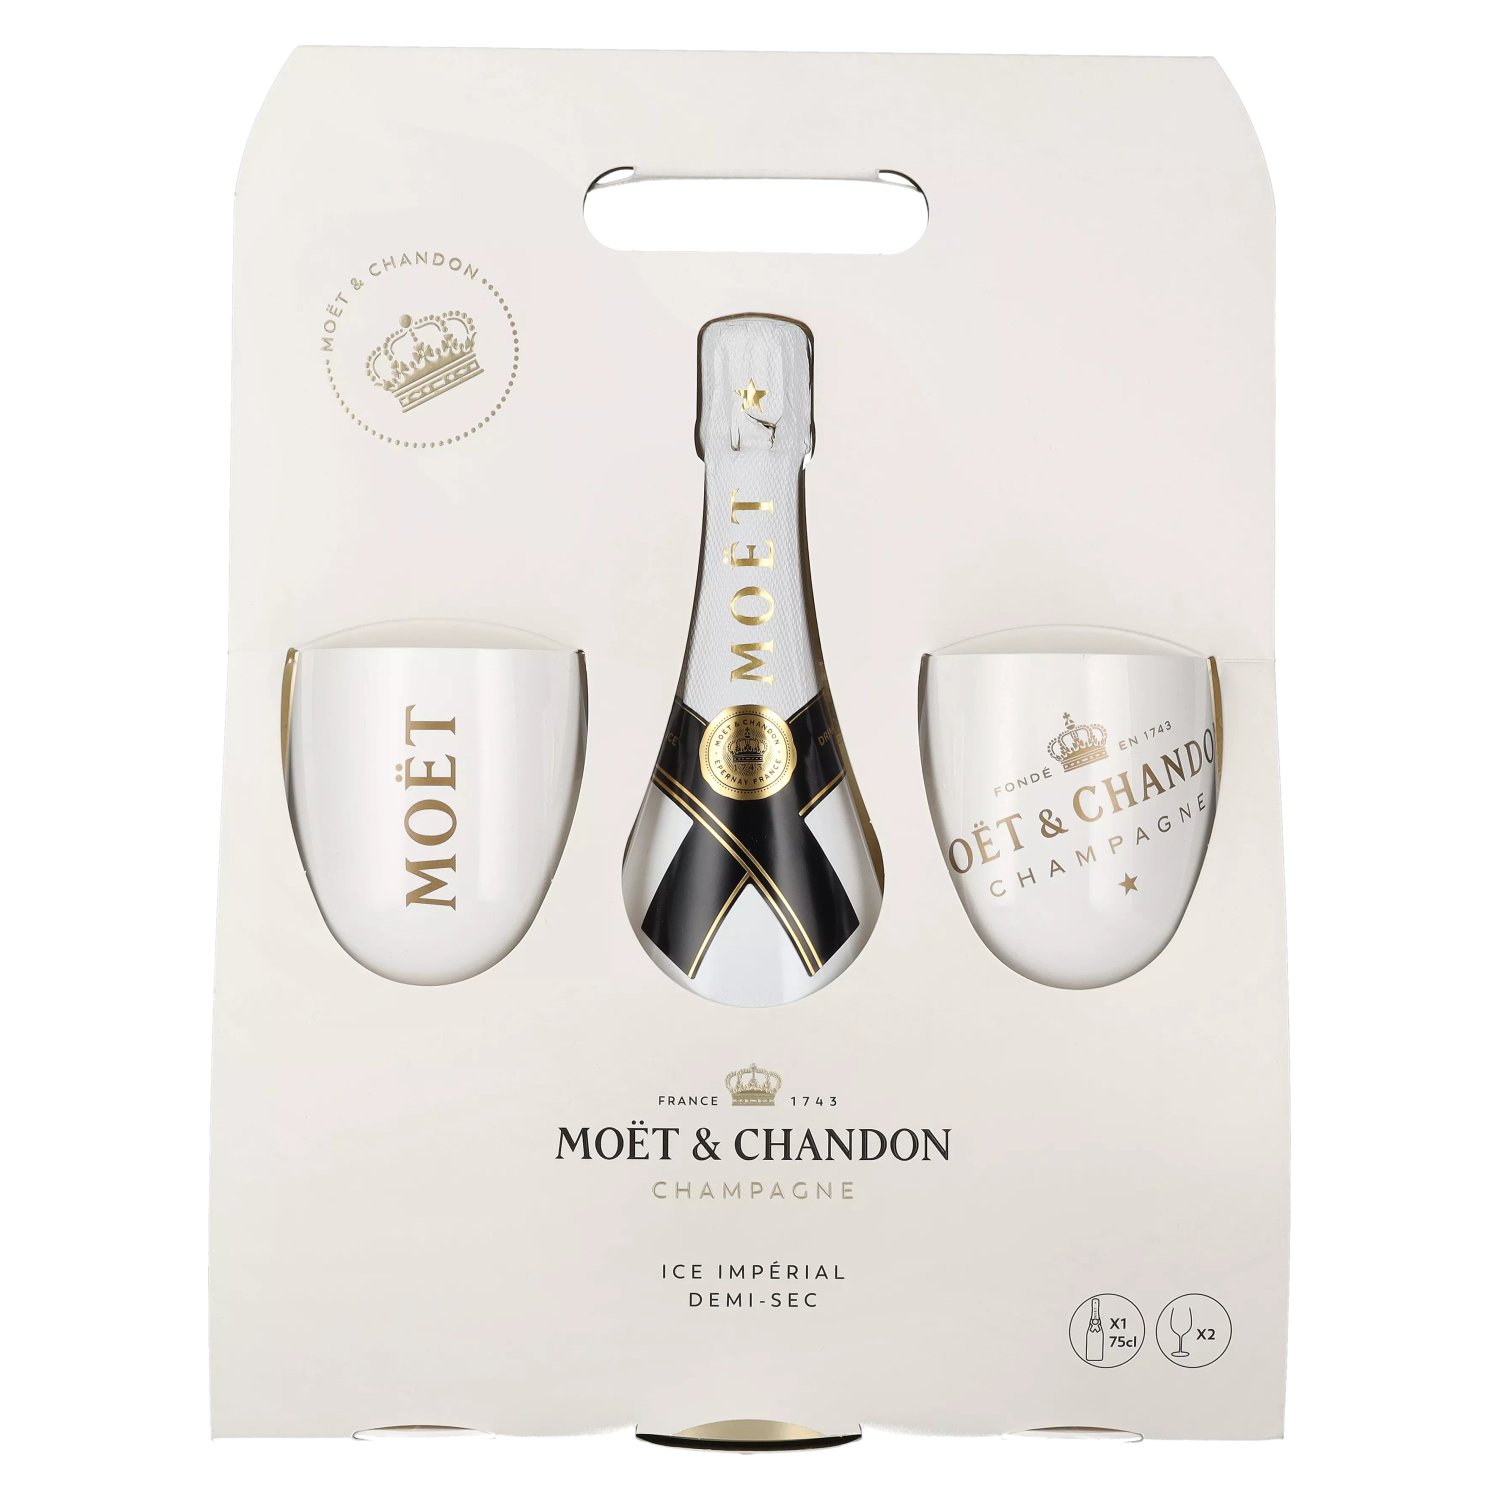 Where to buy Moet & Chandon Brut Imperial Rose with Glasses, Champagne,  France